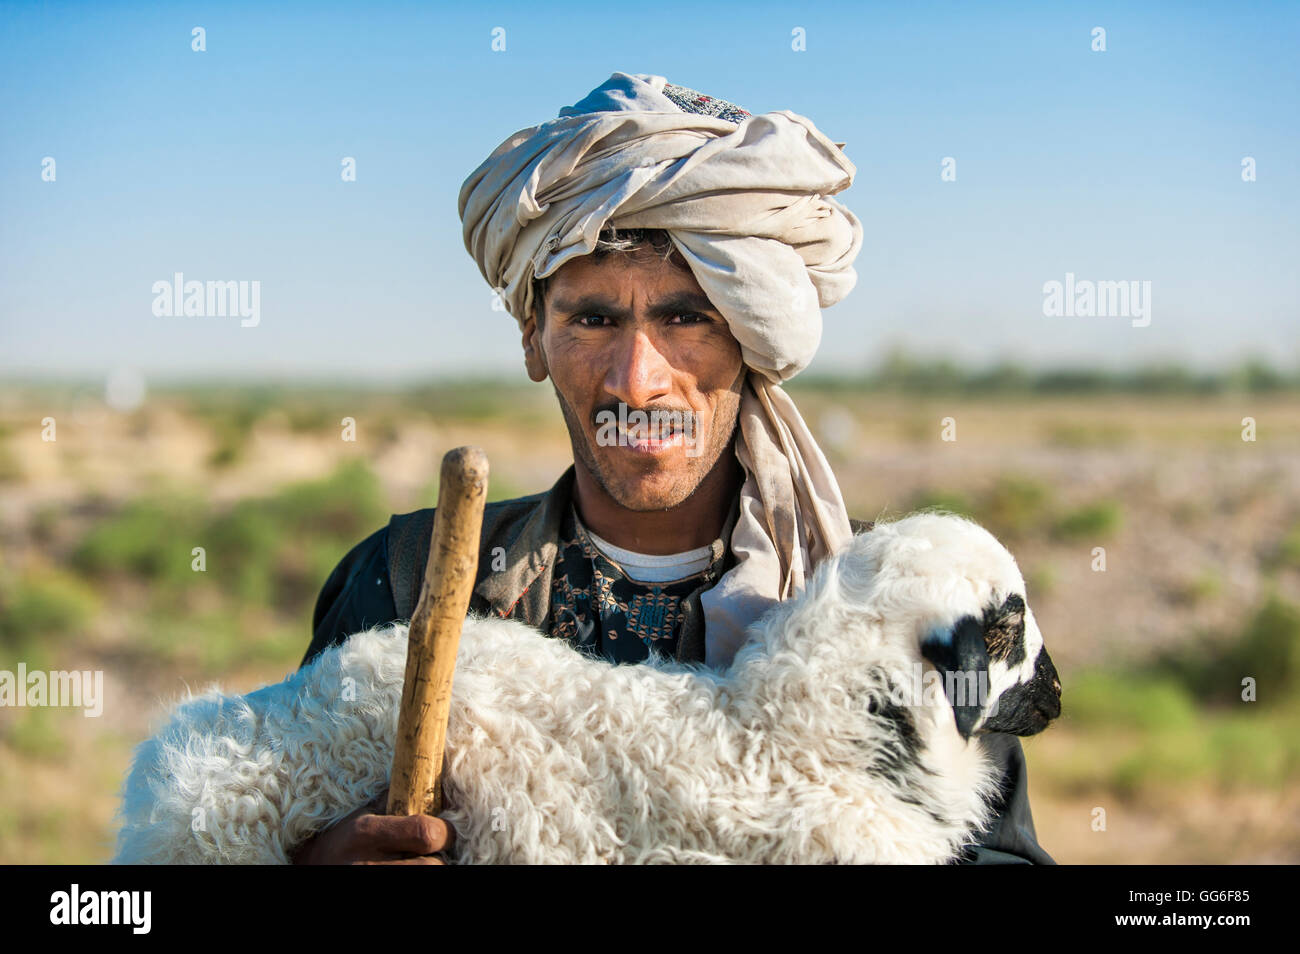 A Kuchi shepherd near Herat in Afghanistan returns a lost lamb back to its flock, Afghanistan, Asia Stock Photo